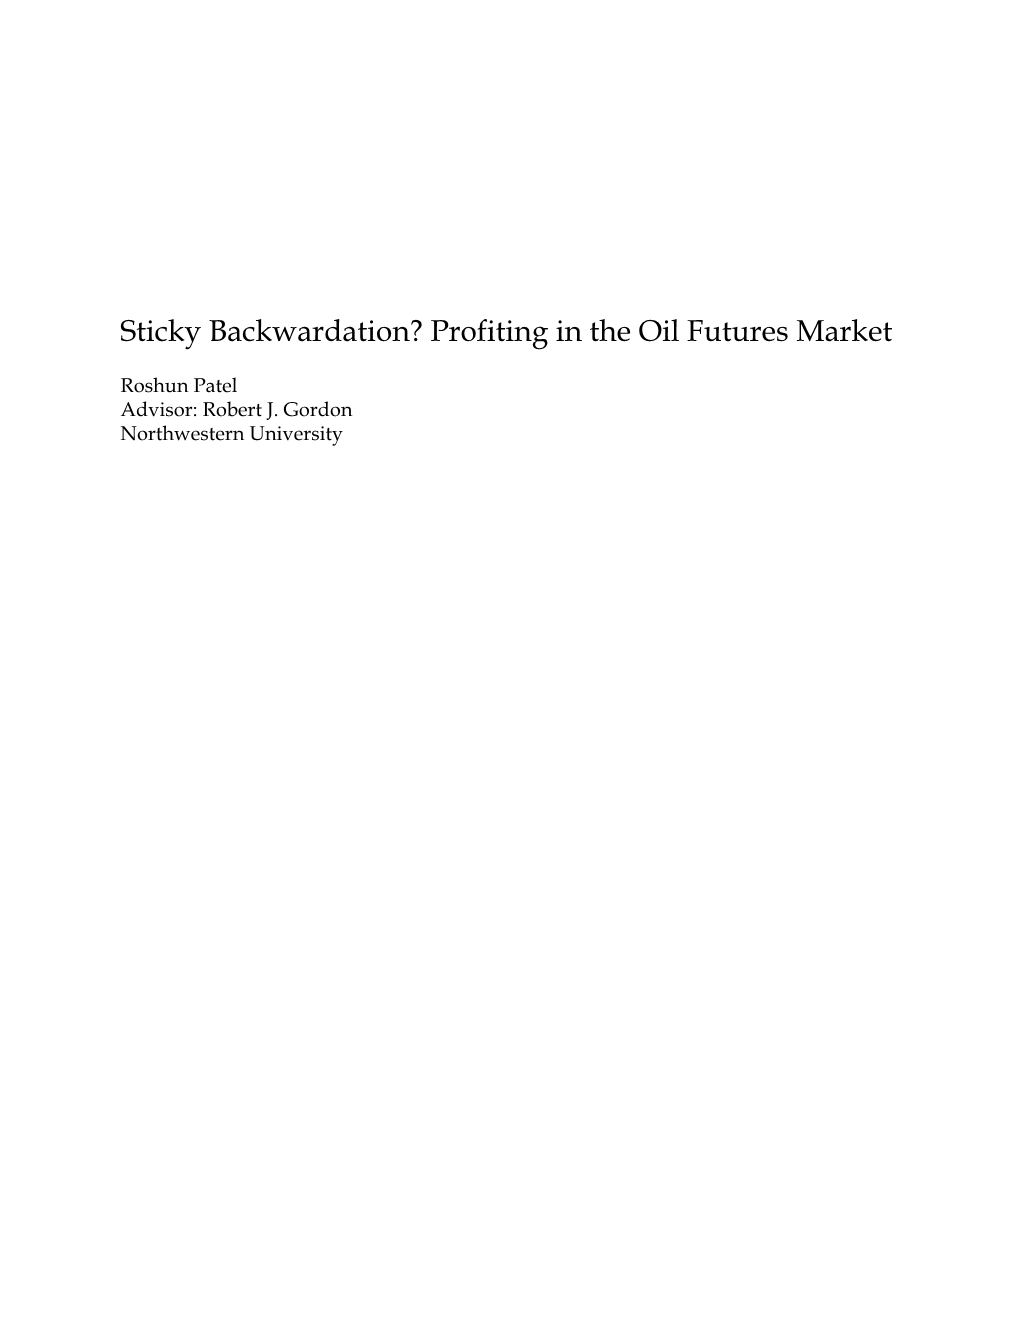 Sticky Backwardation? Profiting in the Oil Futures Market